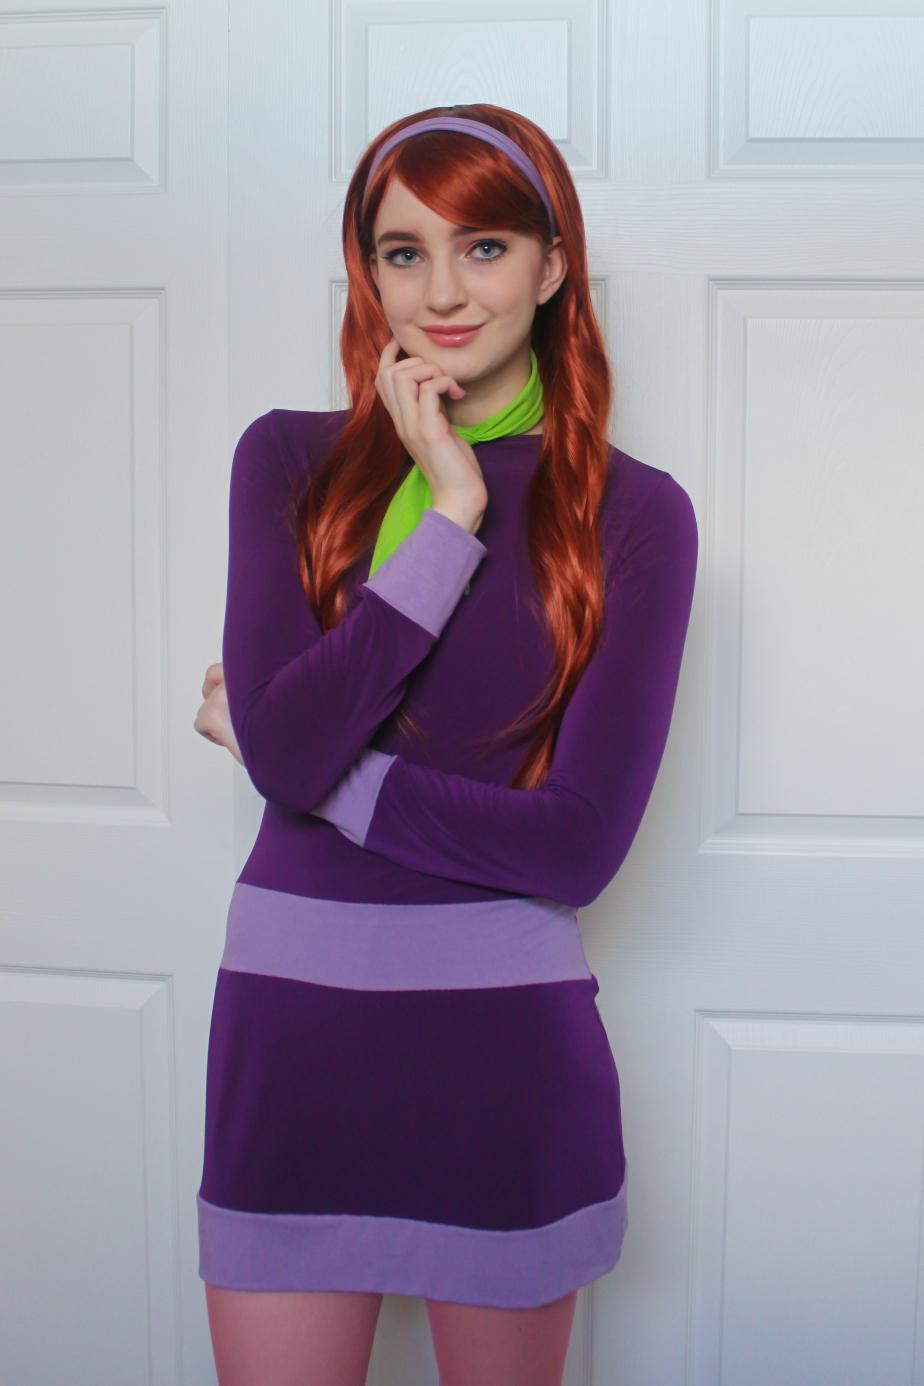 70+ Hot Pictures Of Daphne Blake From Scooby Doo Which Are Sure to Catch Your Attention 86